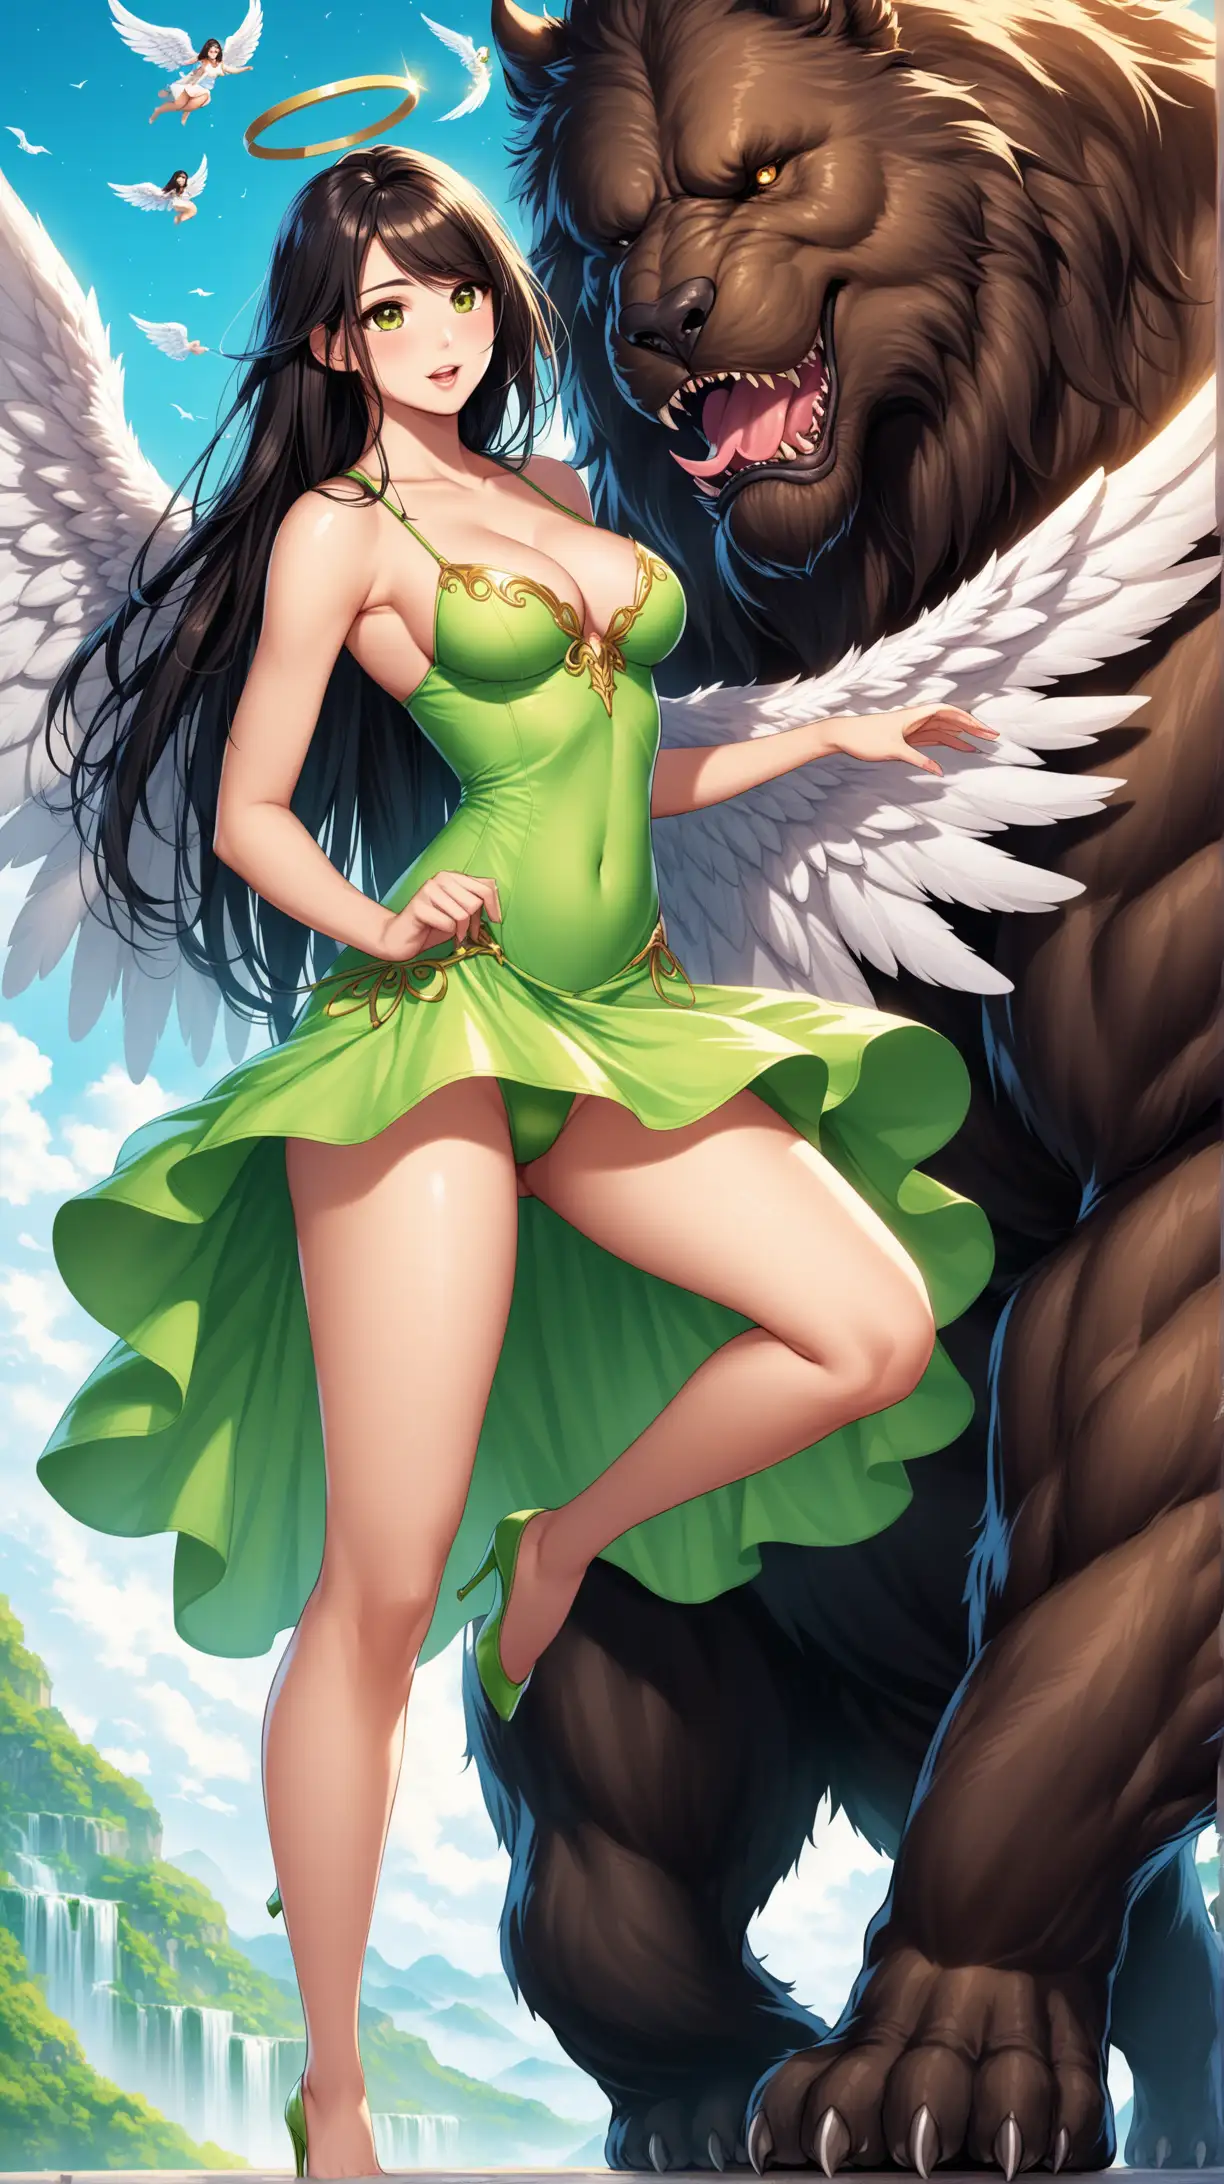 Playful Women in Angel Costumes with a Majestic Beast